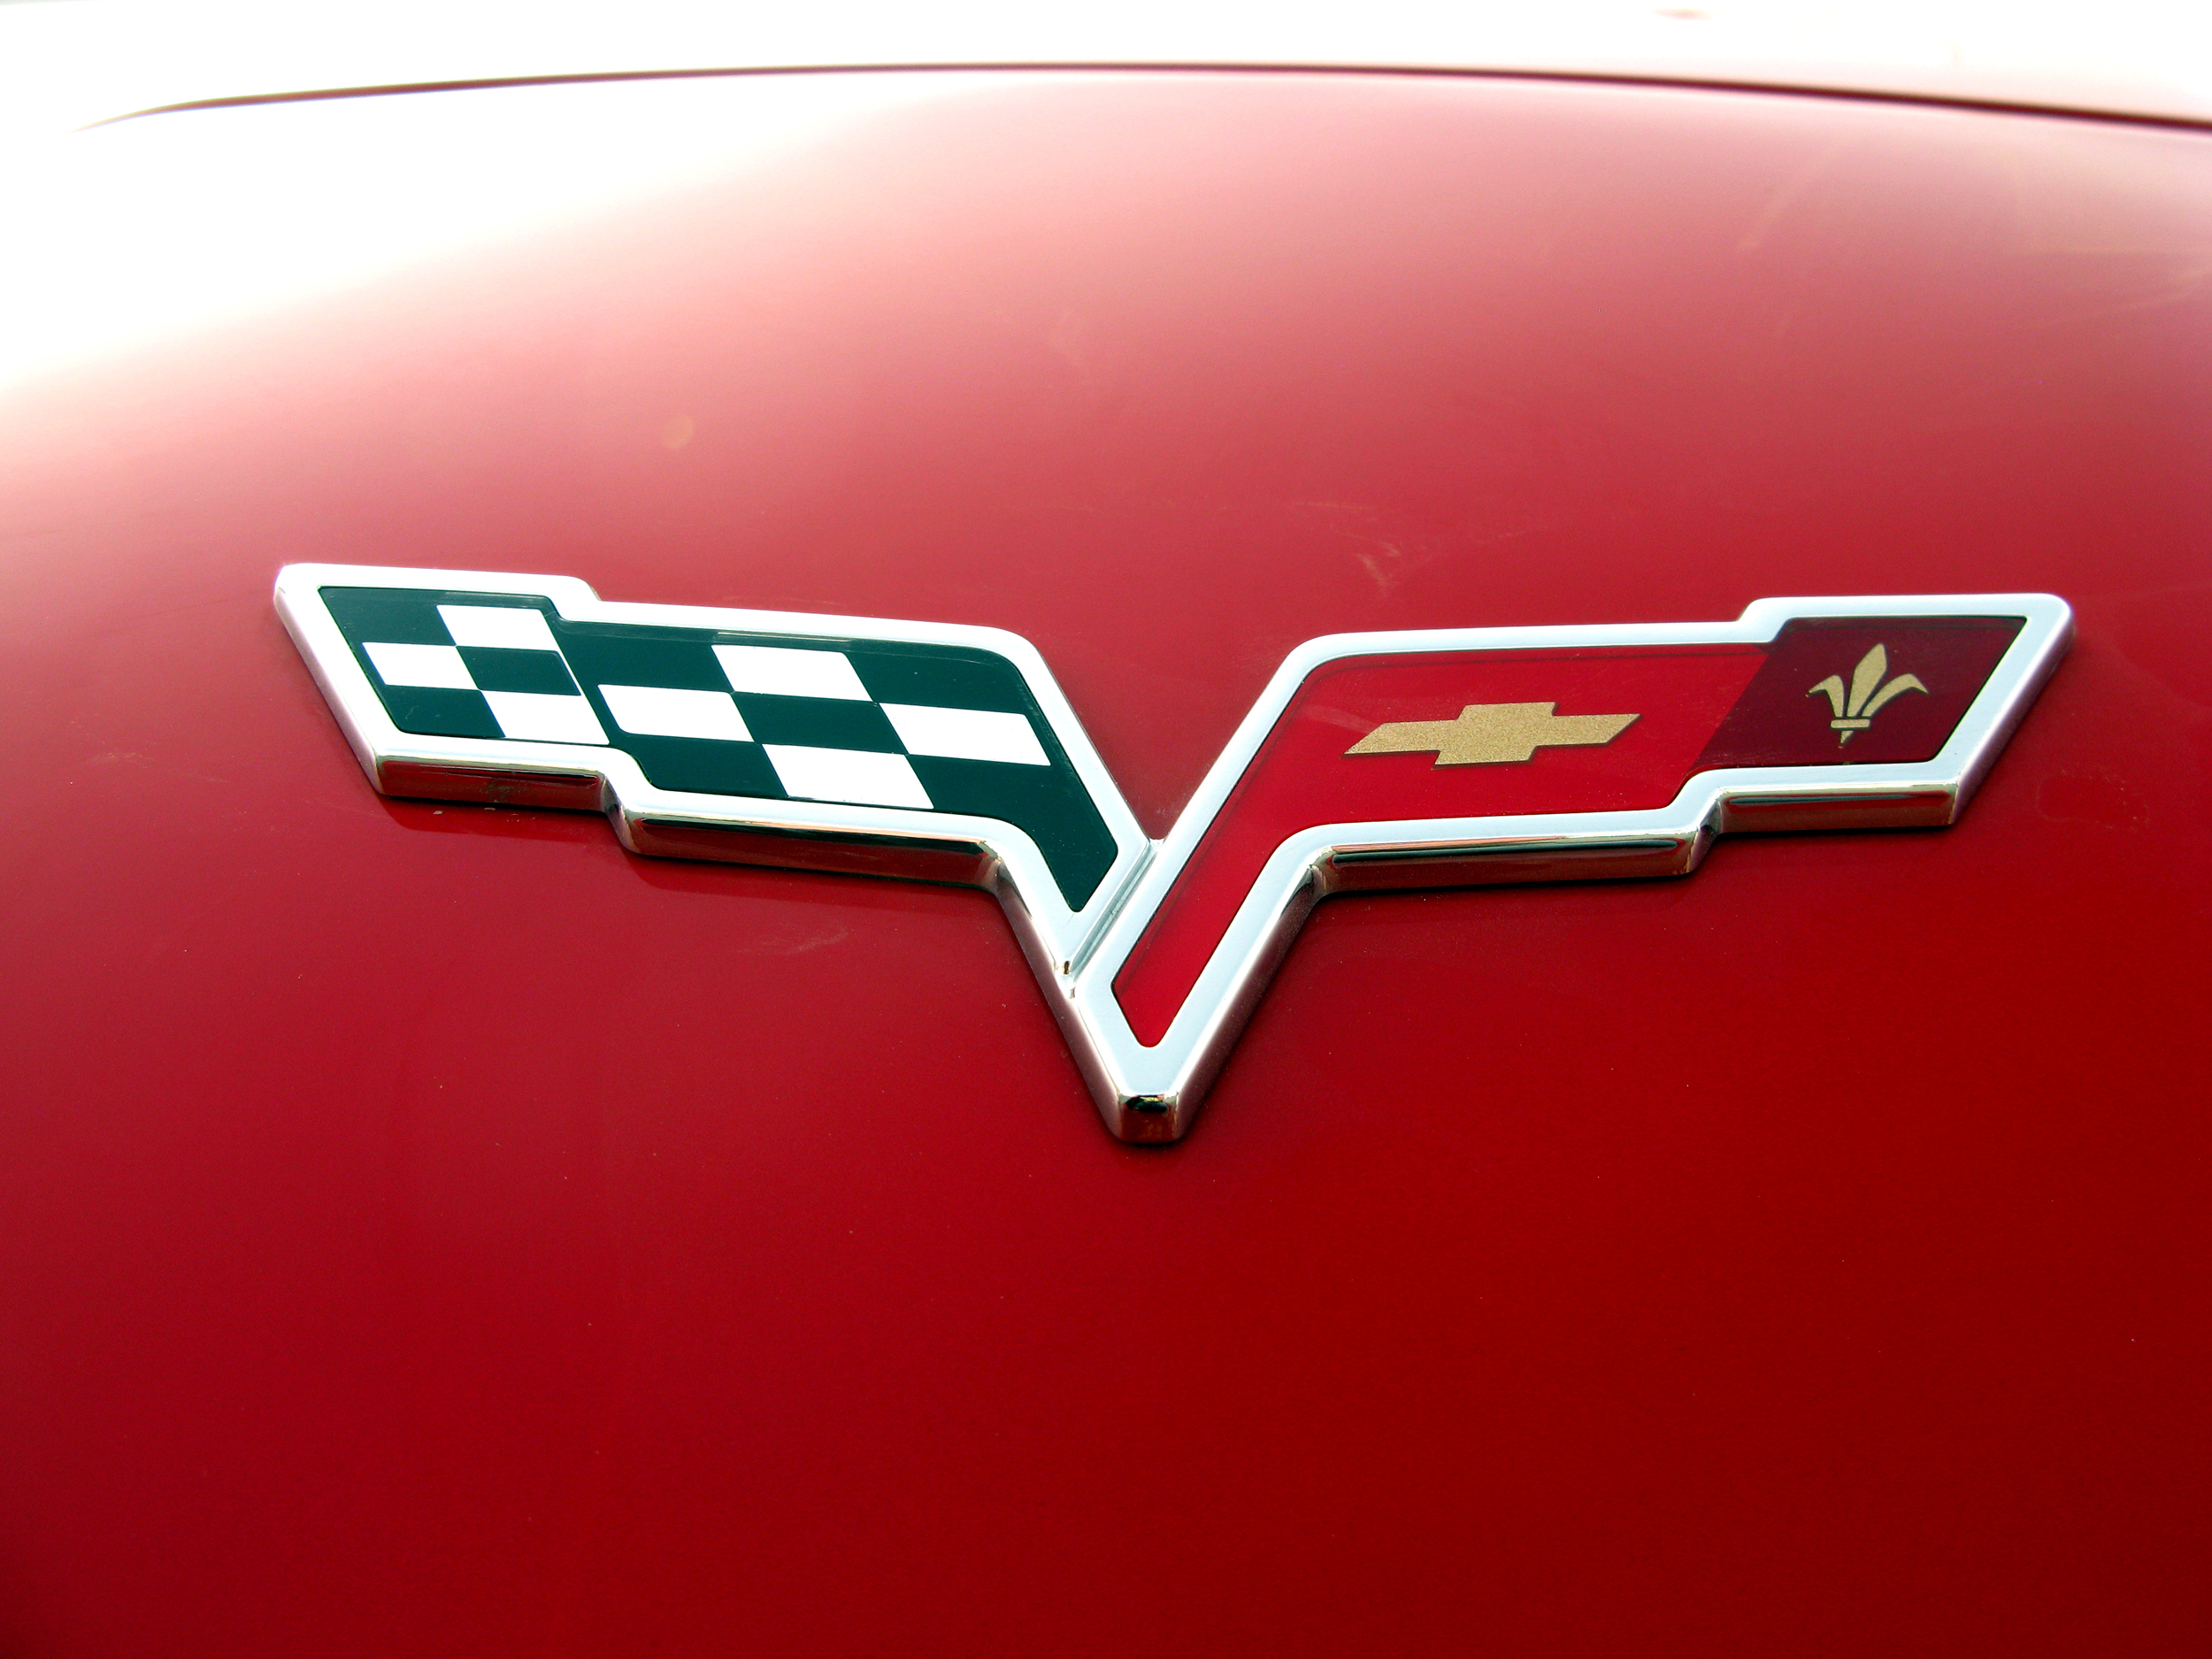 Chevy Logo, Chevrolet Car Symbol Meaning and History, Car. car-brand-names....